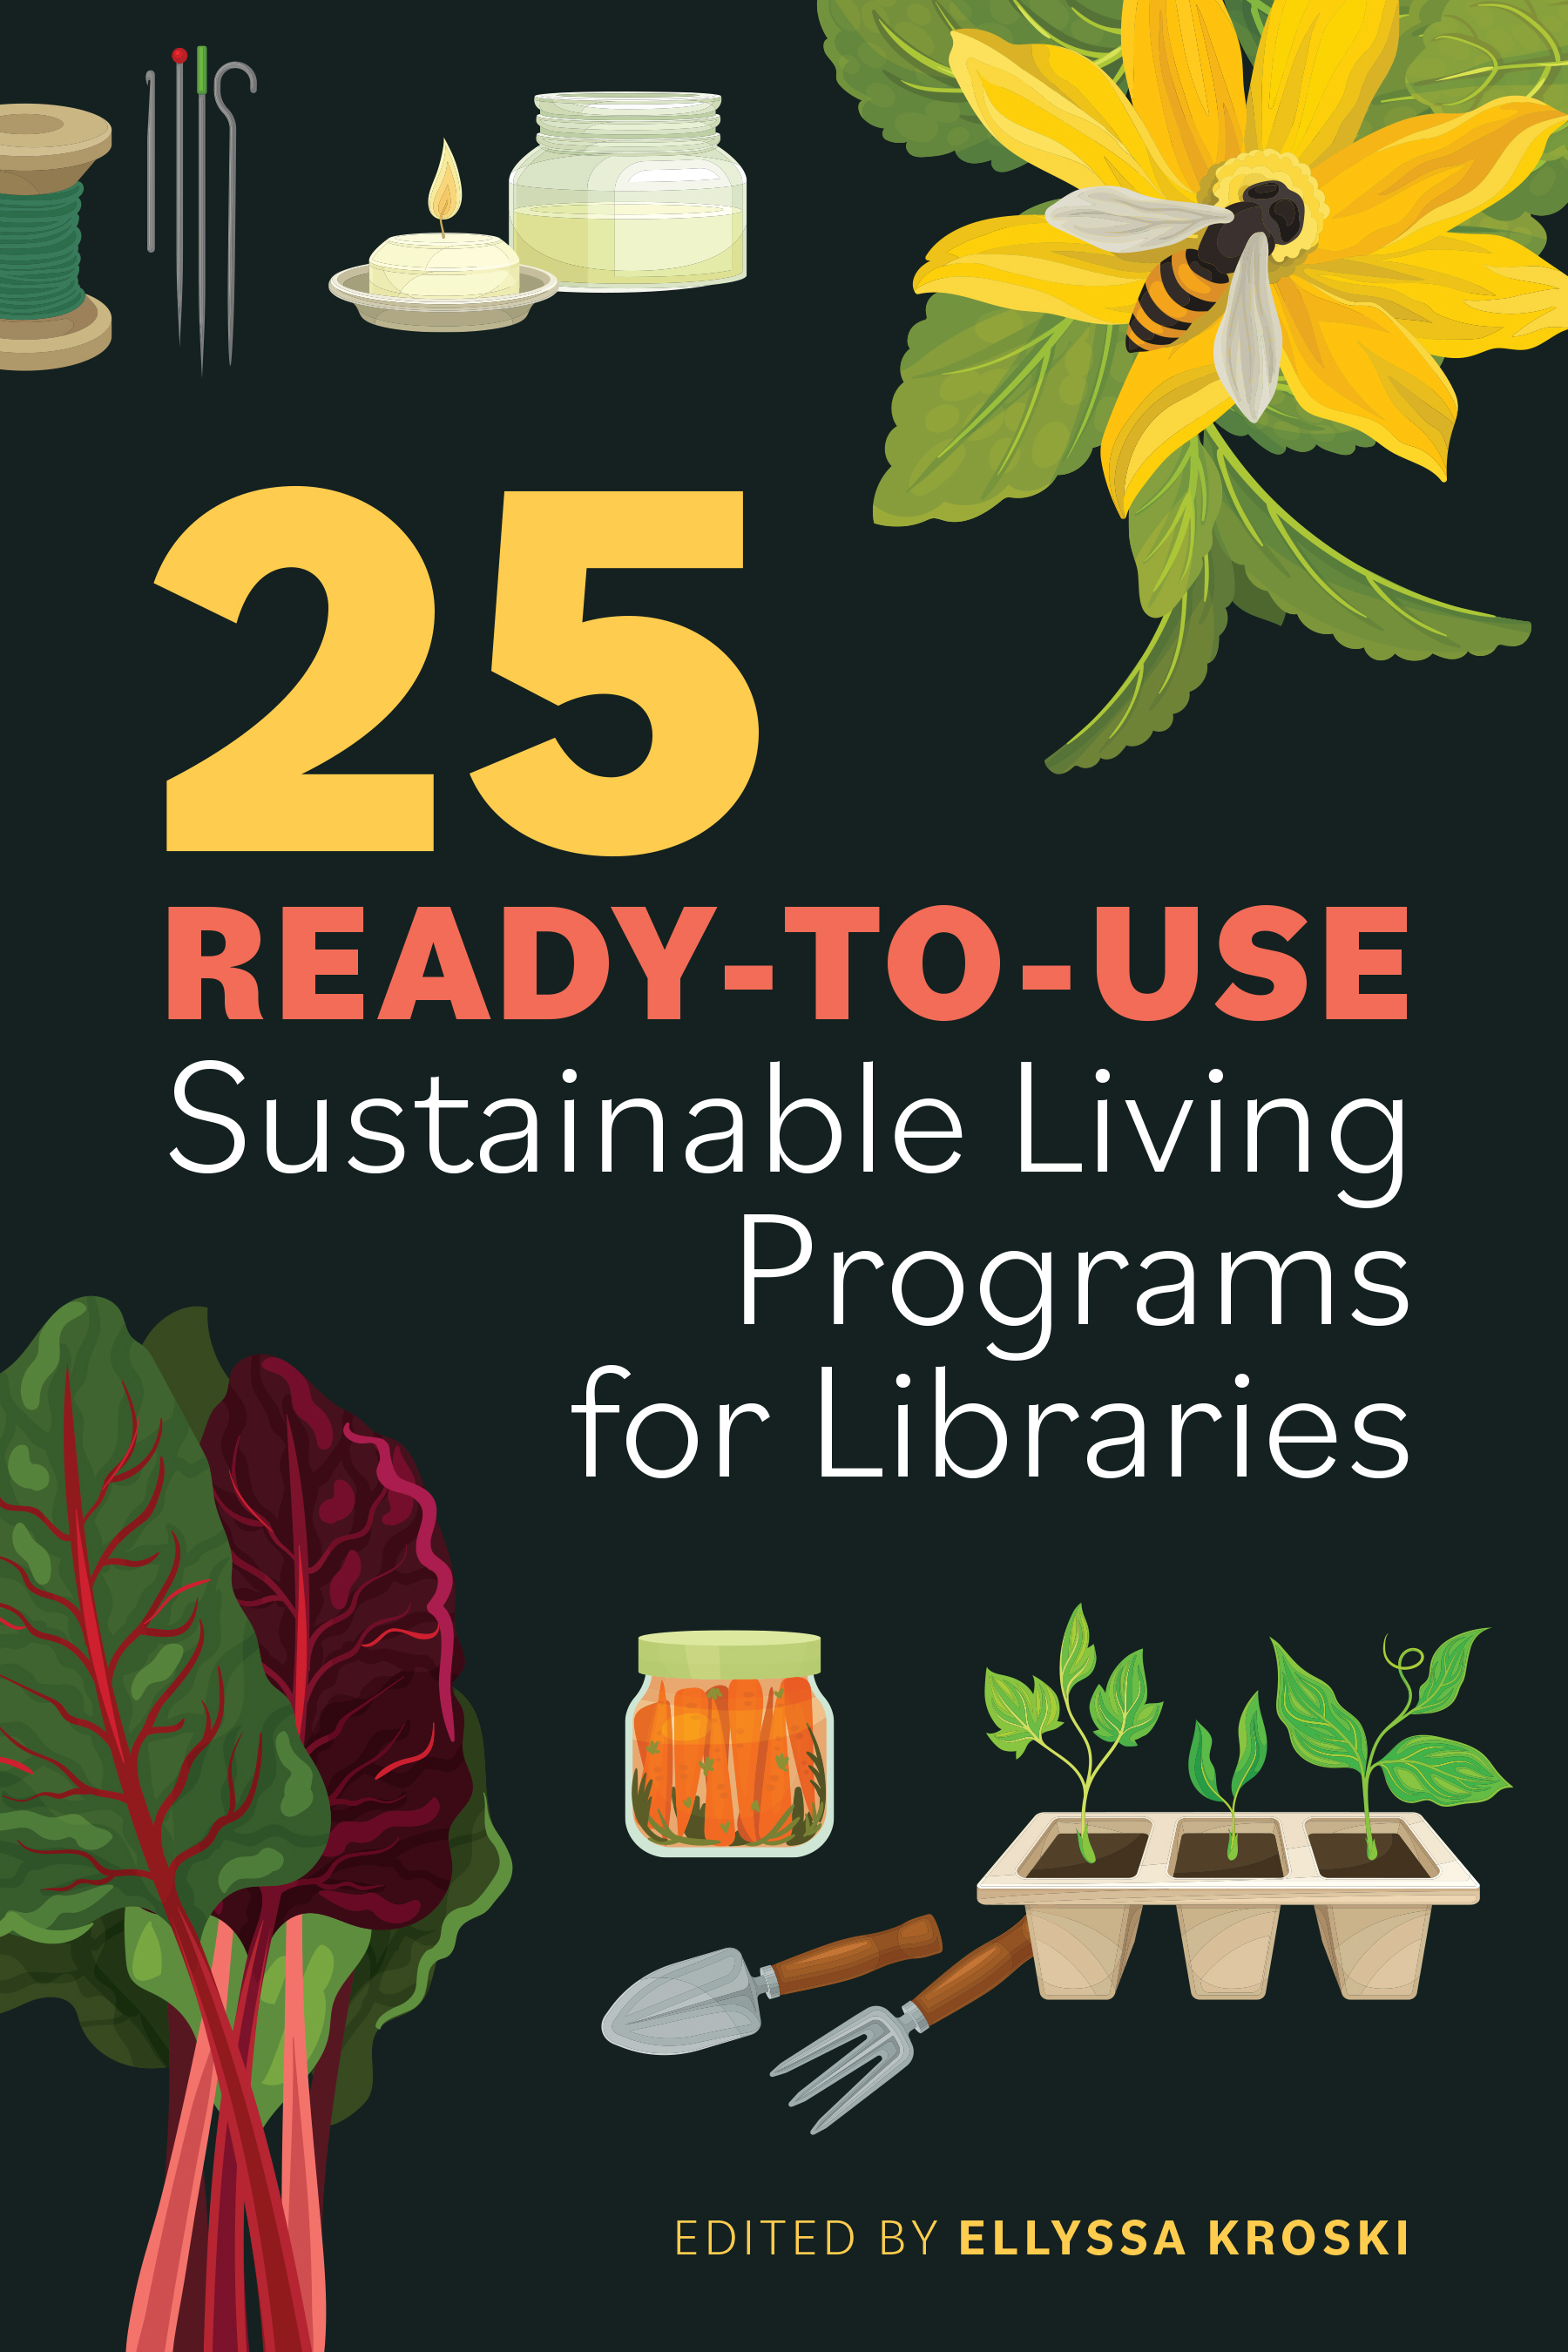 25 Ready-to-Use Sustainable Living Programs for Libraries